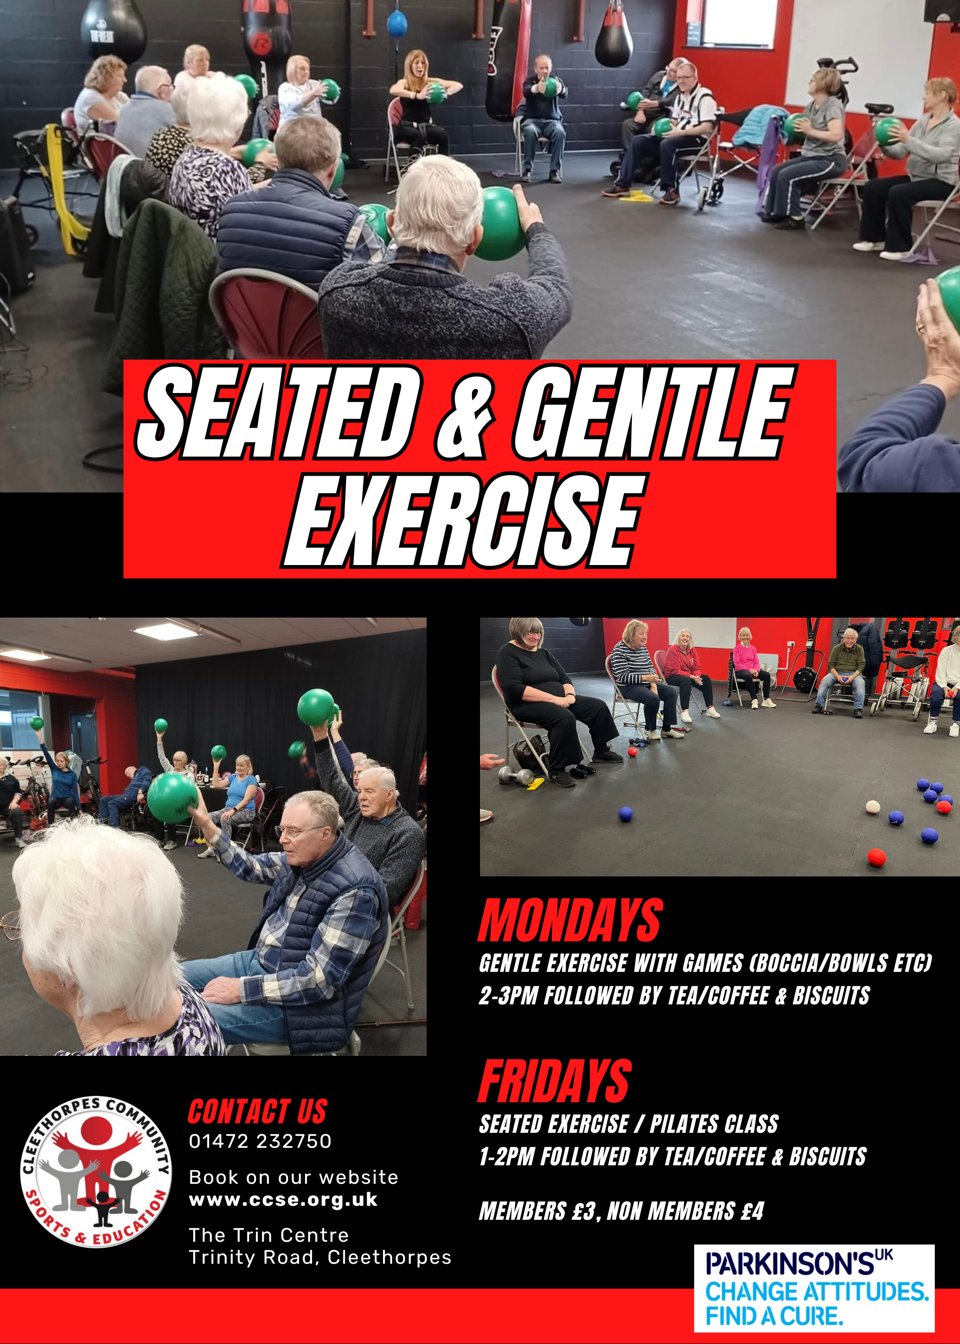 Gentle Exercise with Jamie - Monday's 2pm till 4pm